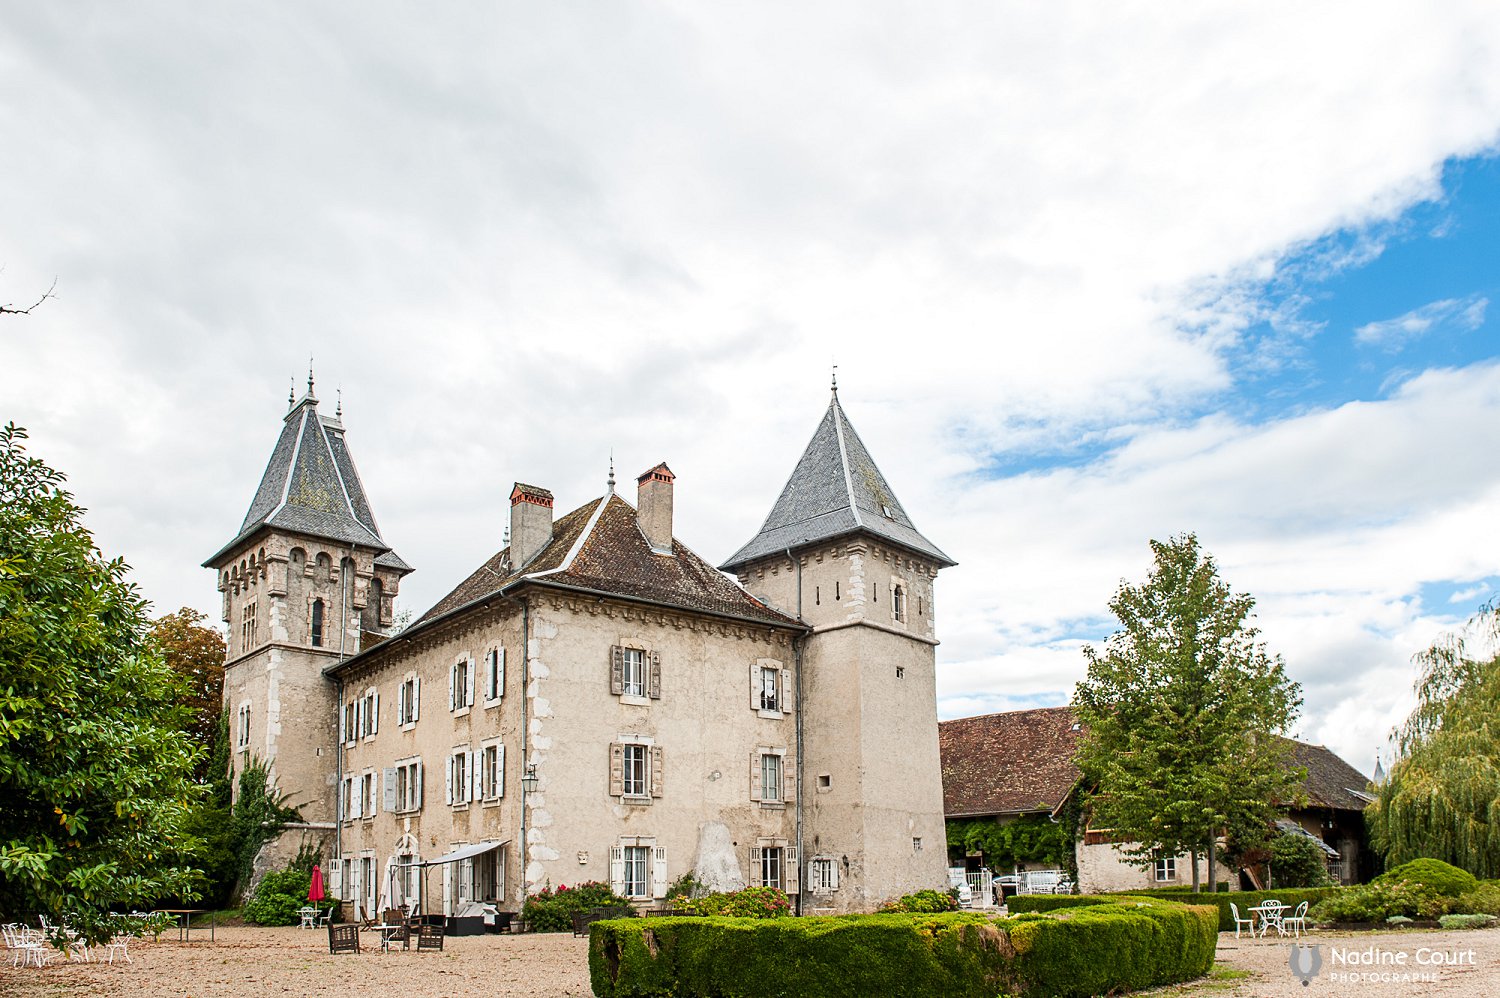 Mariage Château de Saint-Sixt - All you need about wedding planer